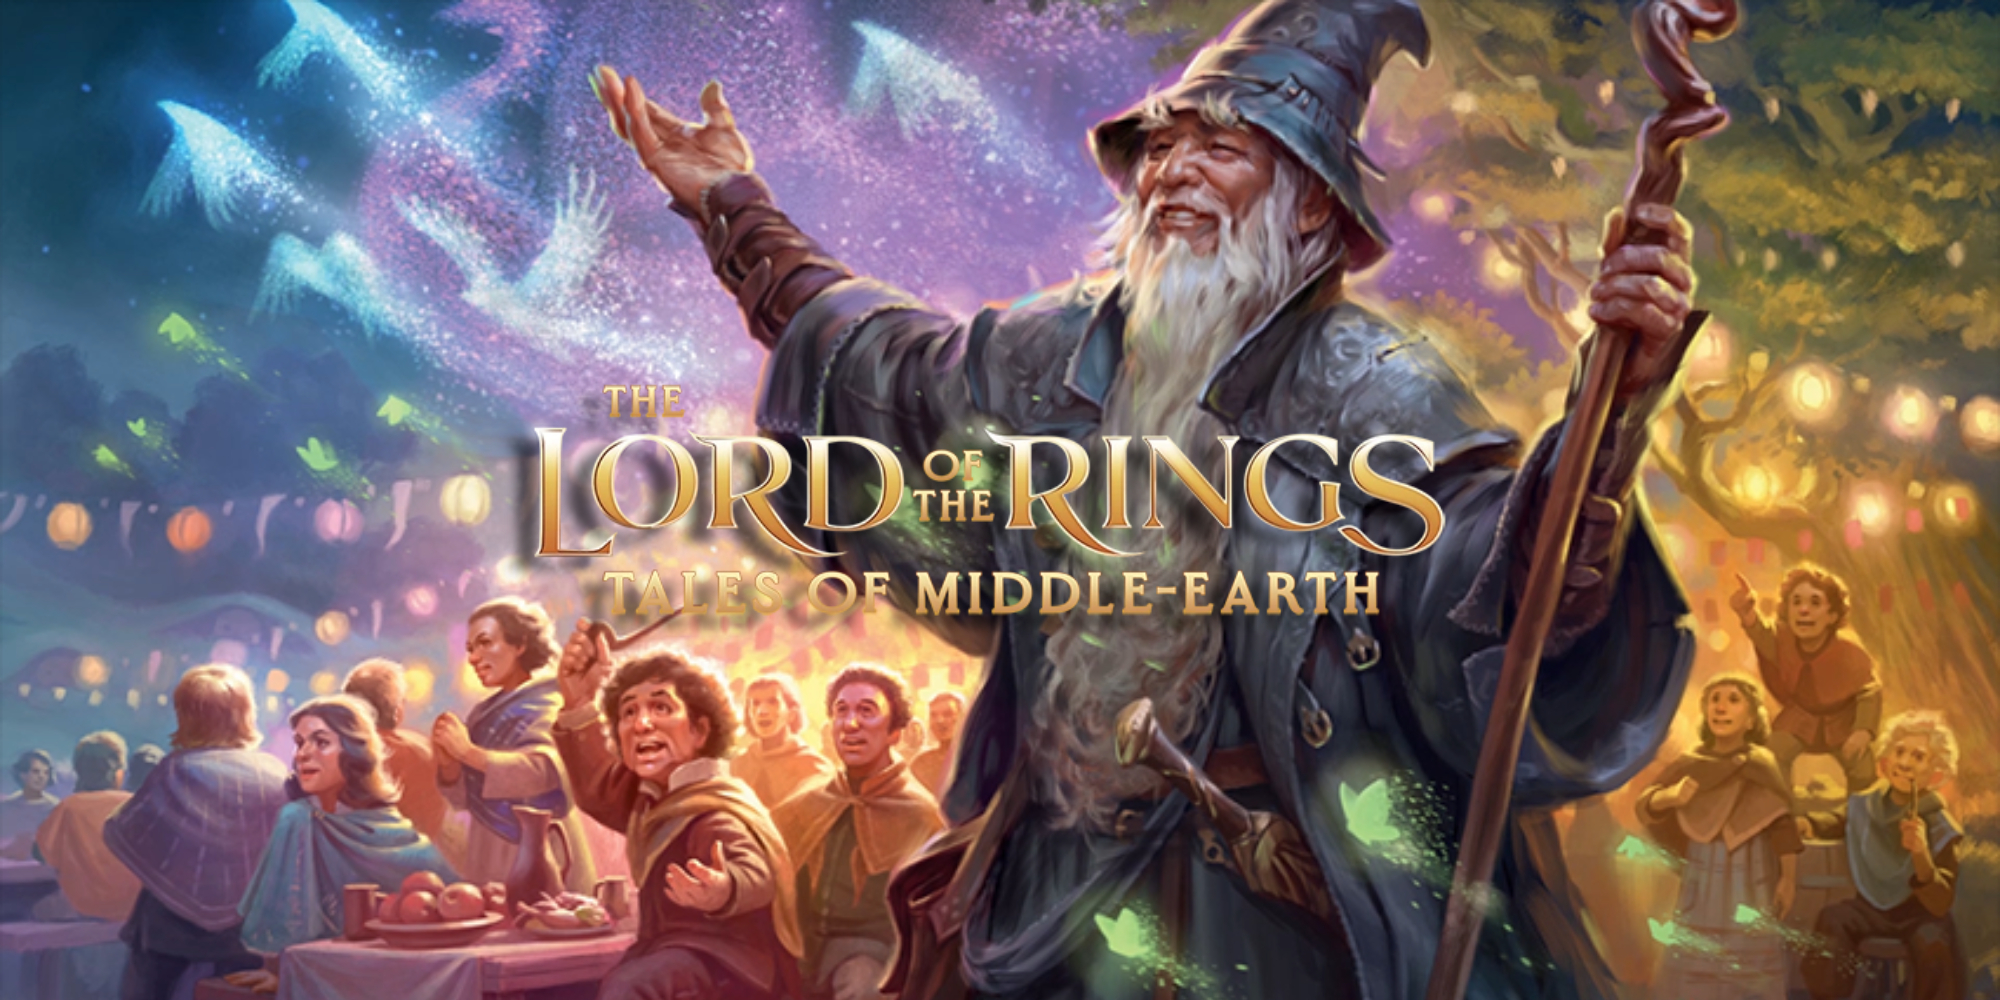 The Lord of the Rings: Tales of Middle-earth Details Emerge